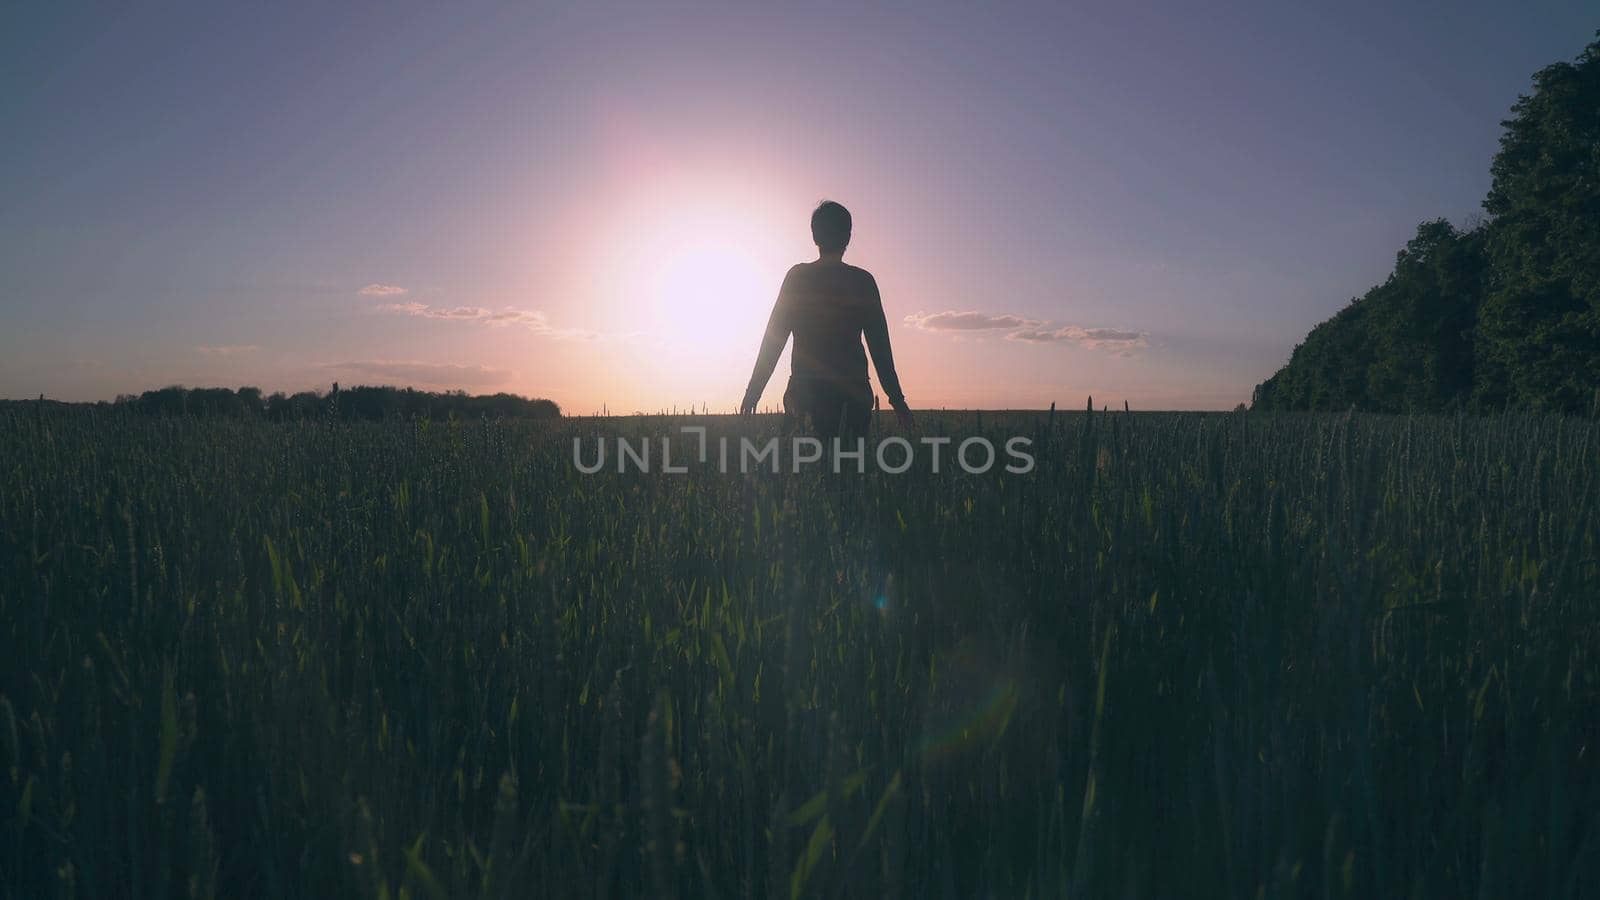 Woman goes by the field with young agricultural in the evening summer season. Wheat spikes and female dress swing in the wind at setting sun rays. Female back view